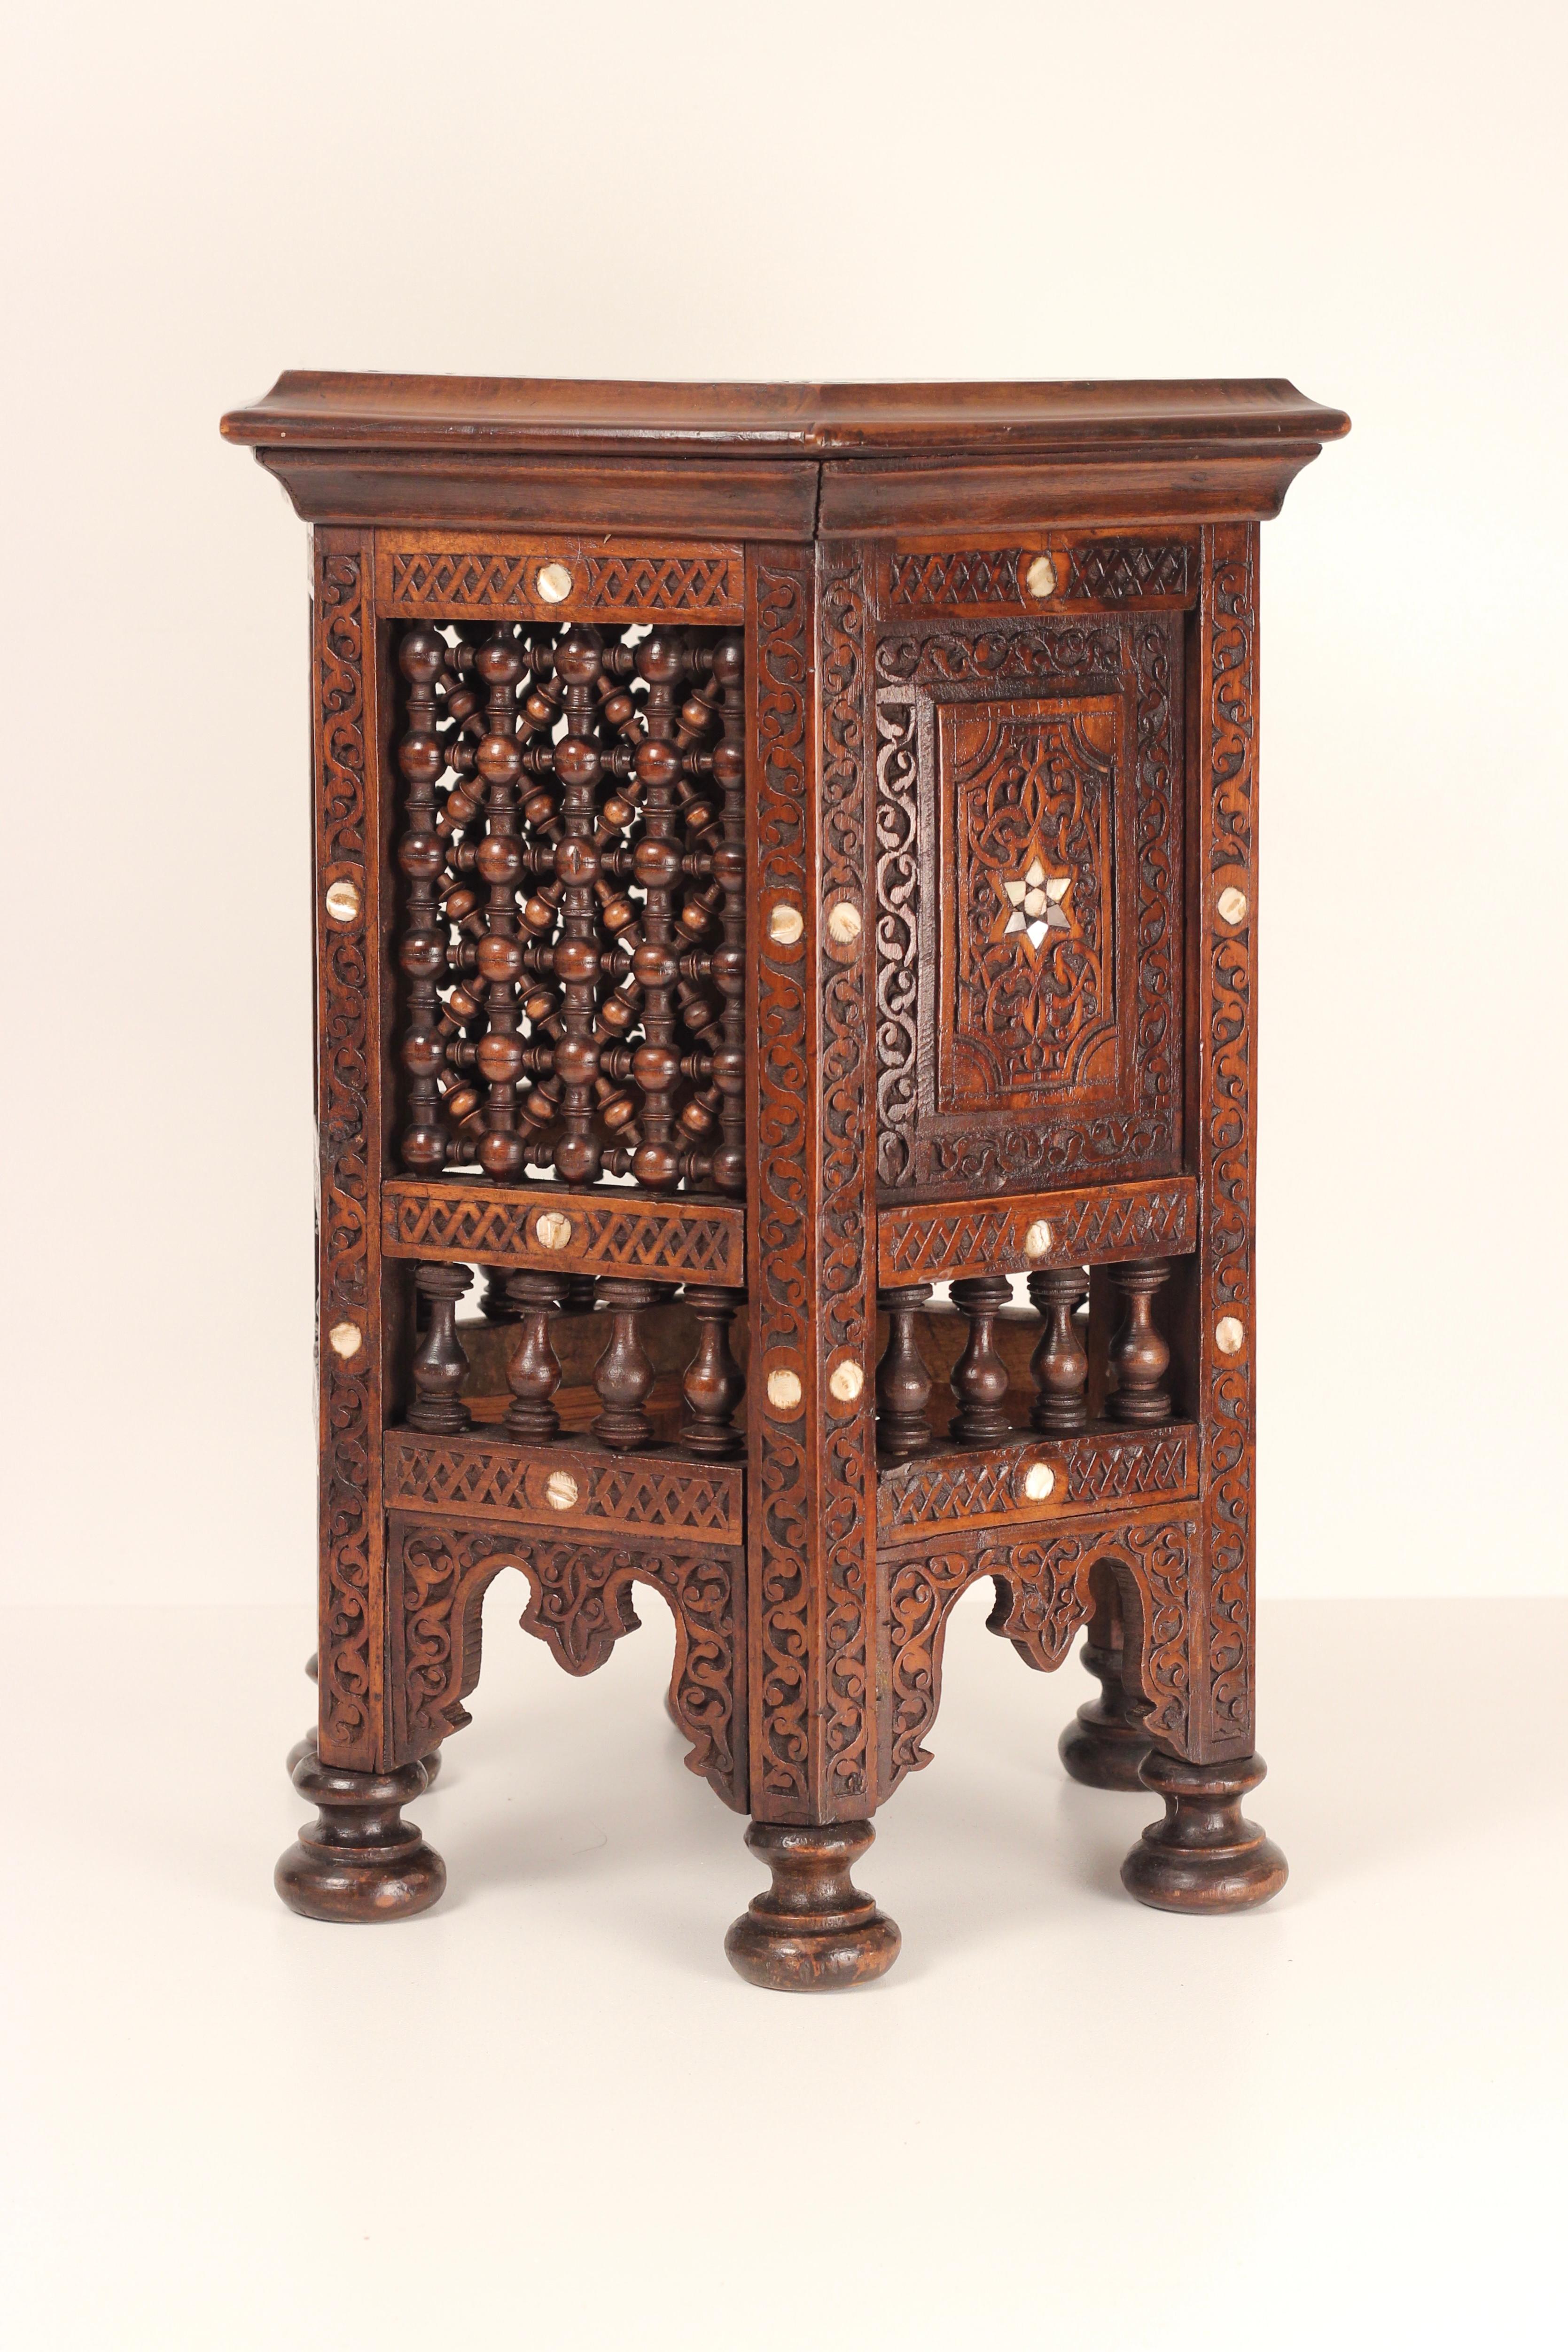 Antique Ottoman side table made around the end of the 19th century in Lebanon. An ornately carved geometric design with delicate Mother of Pear inlay flowers in the Style of the Ottomans. This Hexagonal table serves as a functional and practical